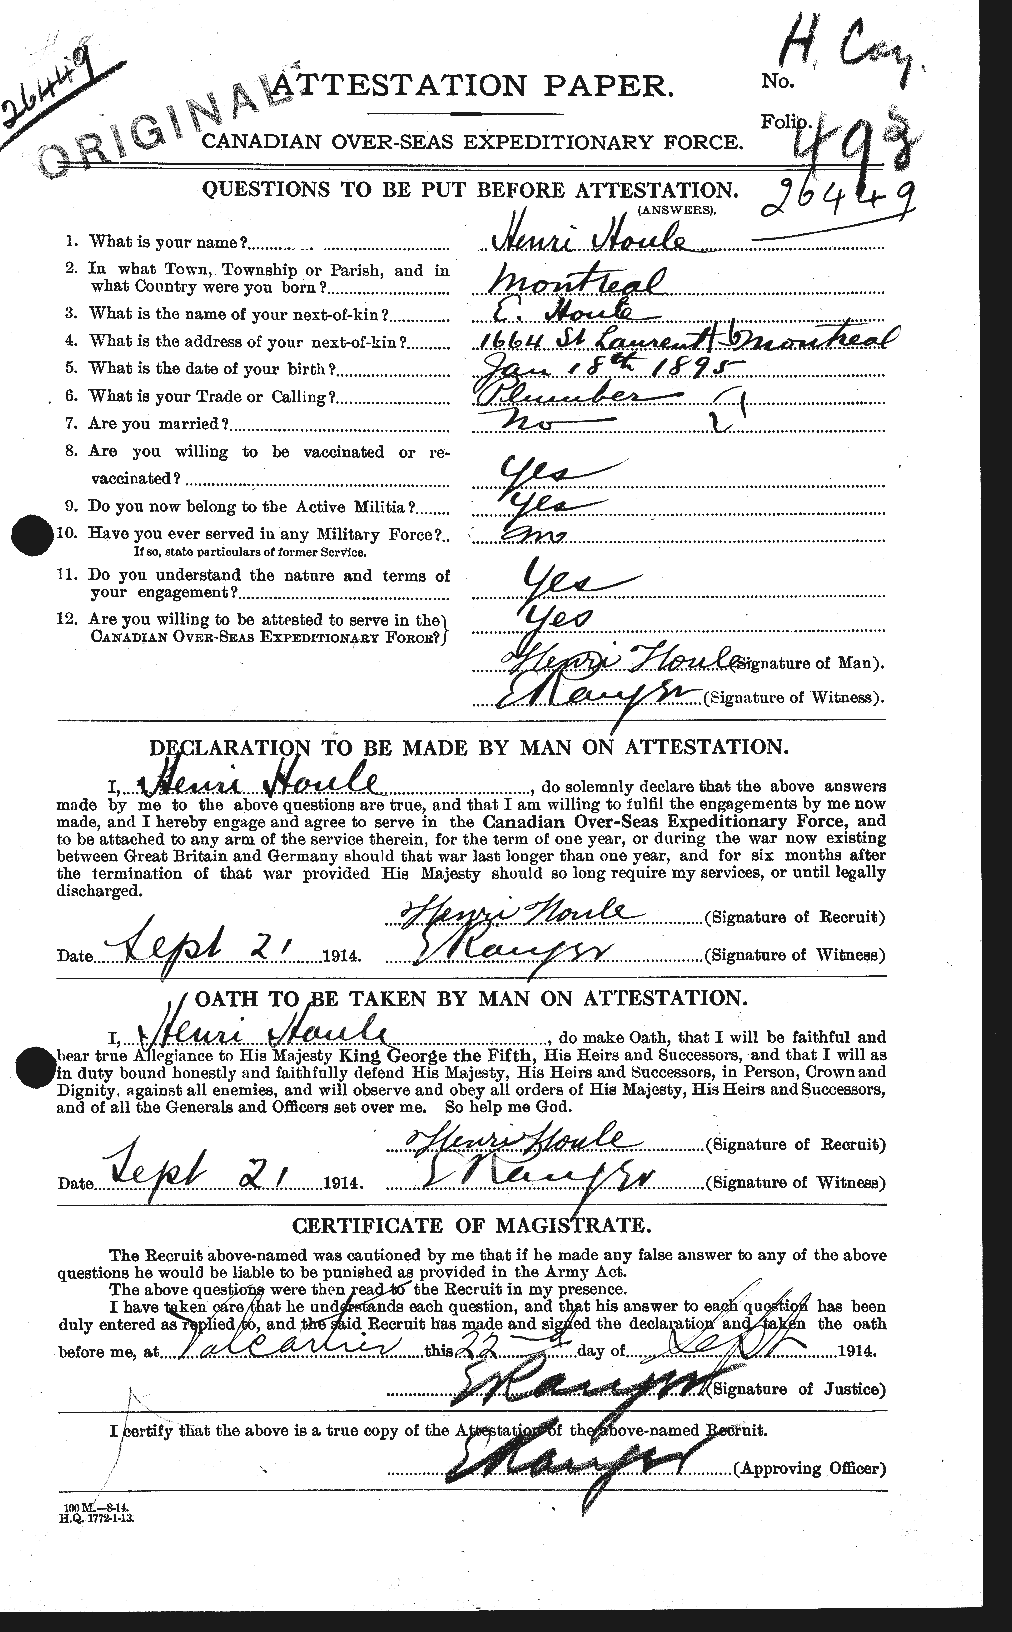 Personnel Records of the First World War - CEF 401557a